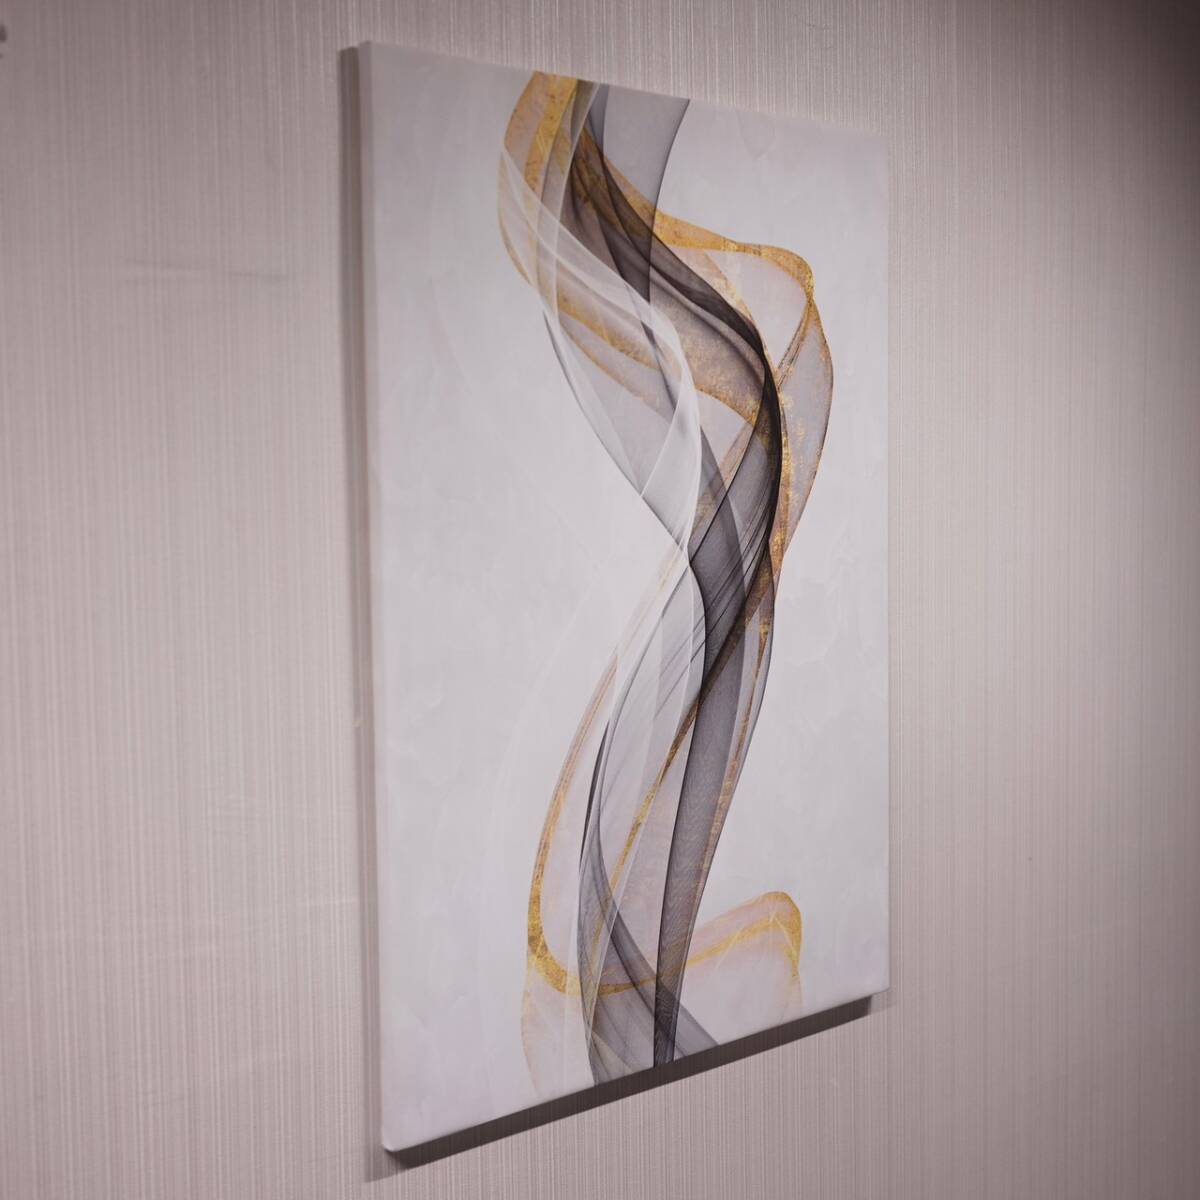 Abstract Painting Print Art Large 80x60 New Art Contemporary Art Wall Hanging Modern Scandinavian Mid-Century Spiral, artwork, painting, others